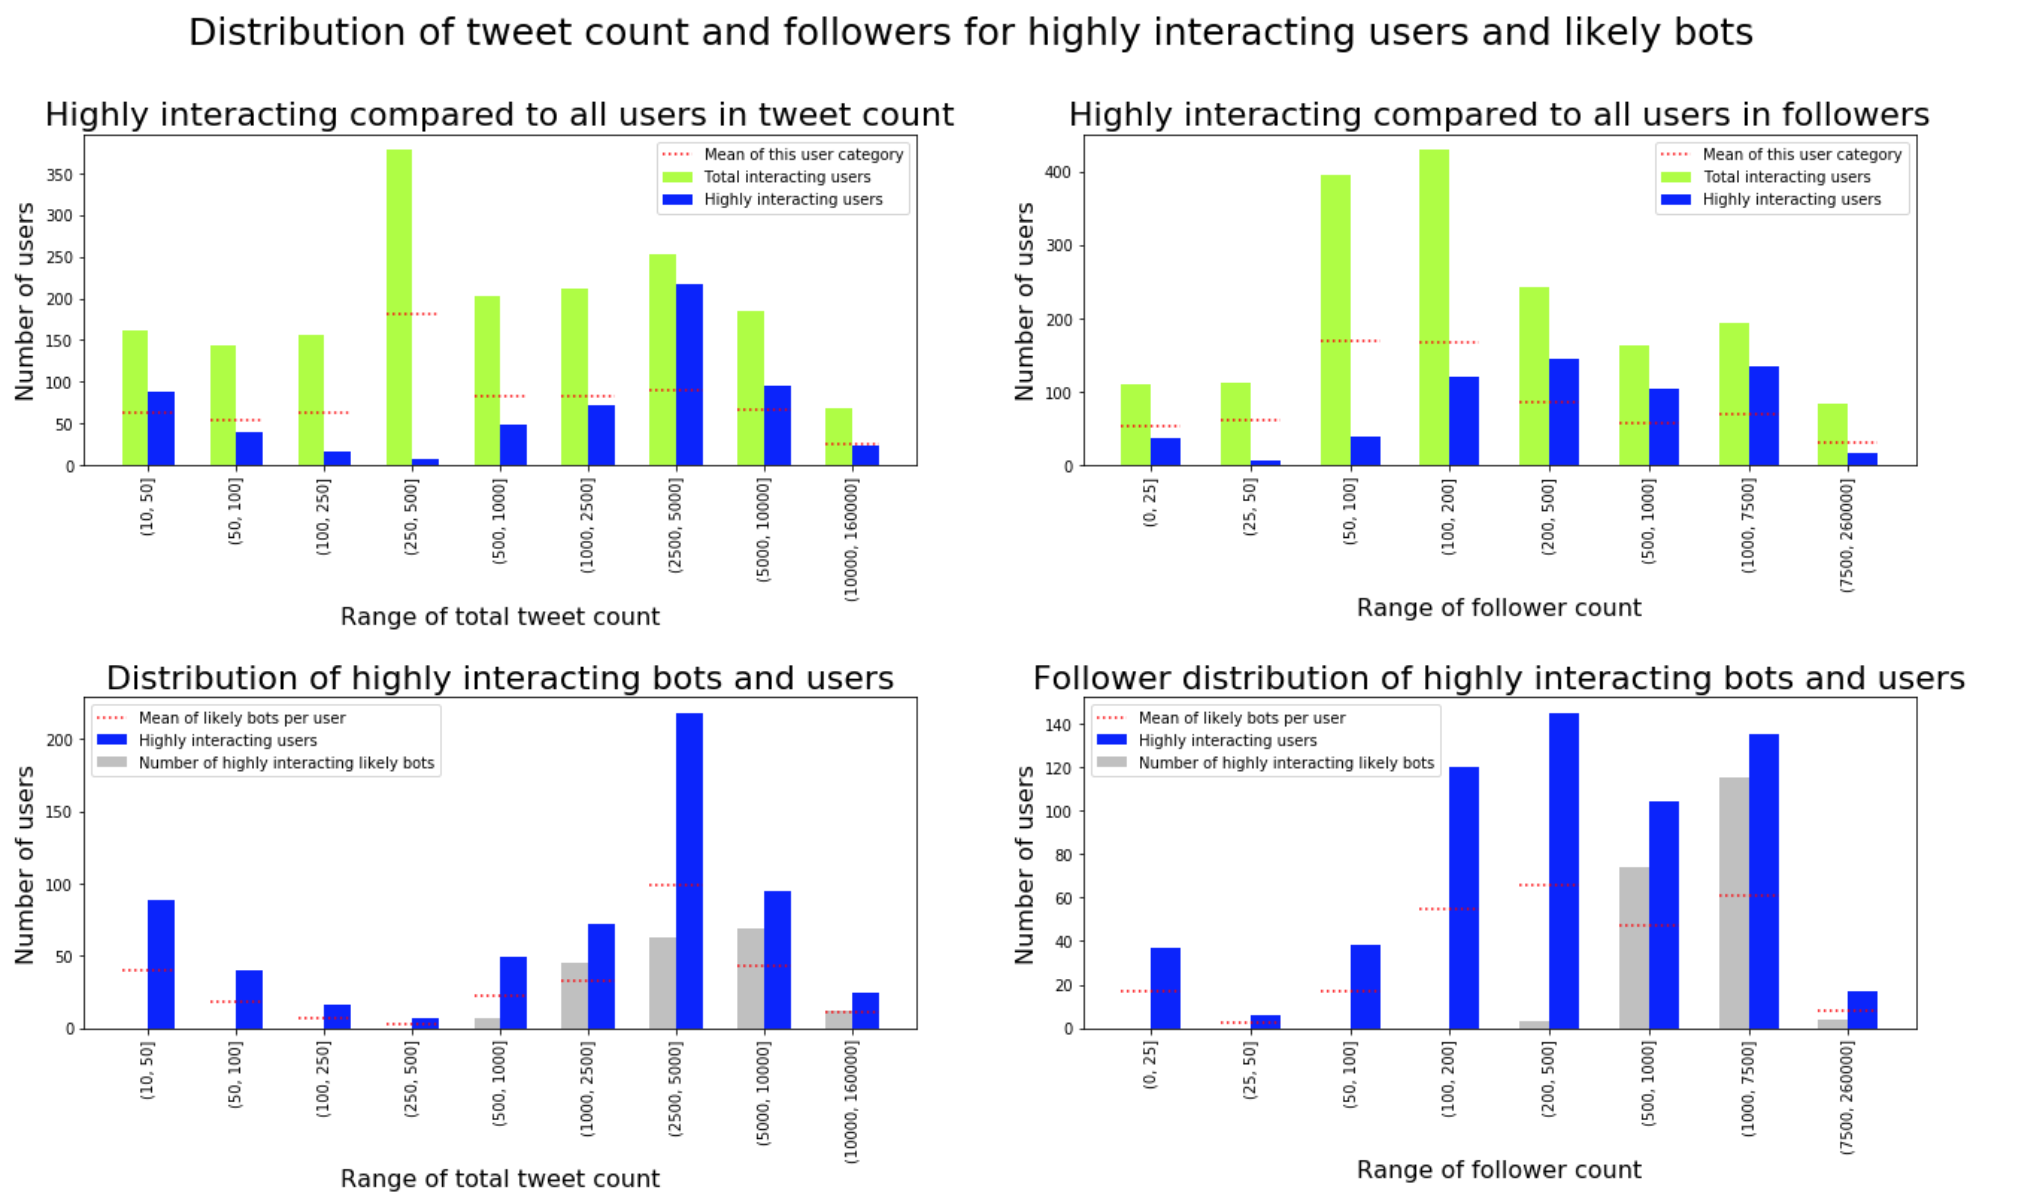 Highly interacting users and likely bots